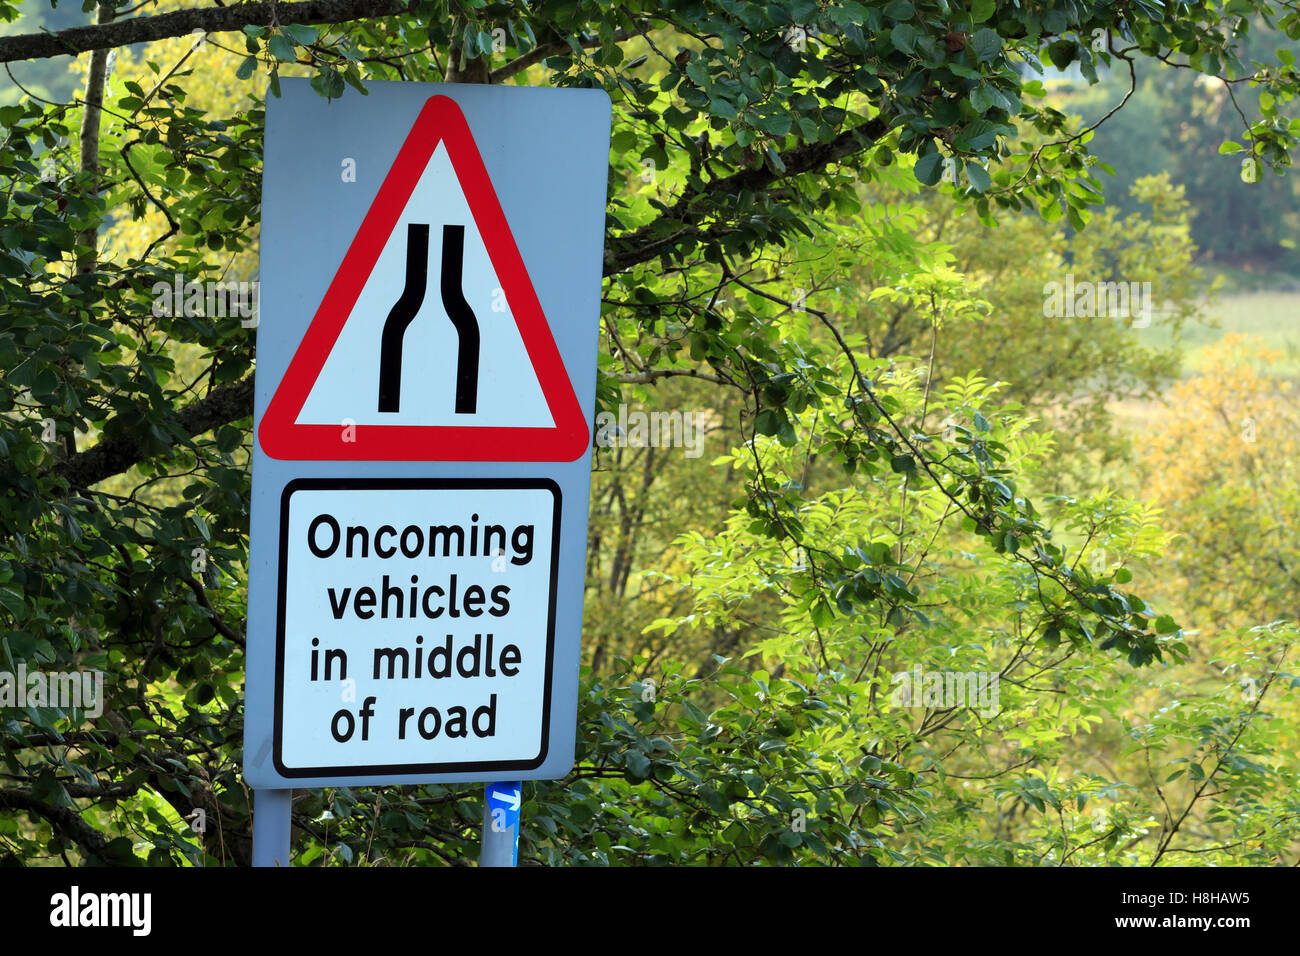 Warning sign of oncoming Vehicles in middle of road Stock Photo